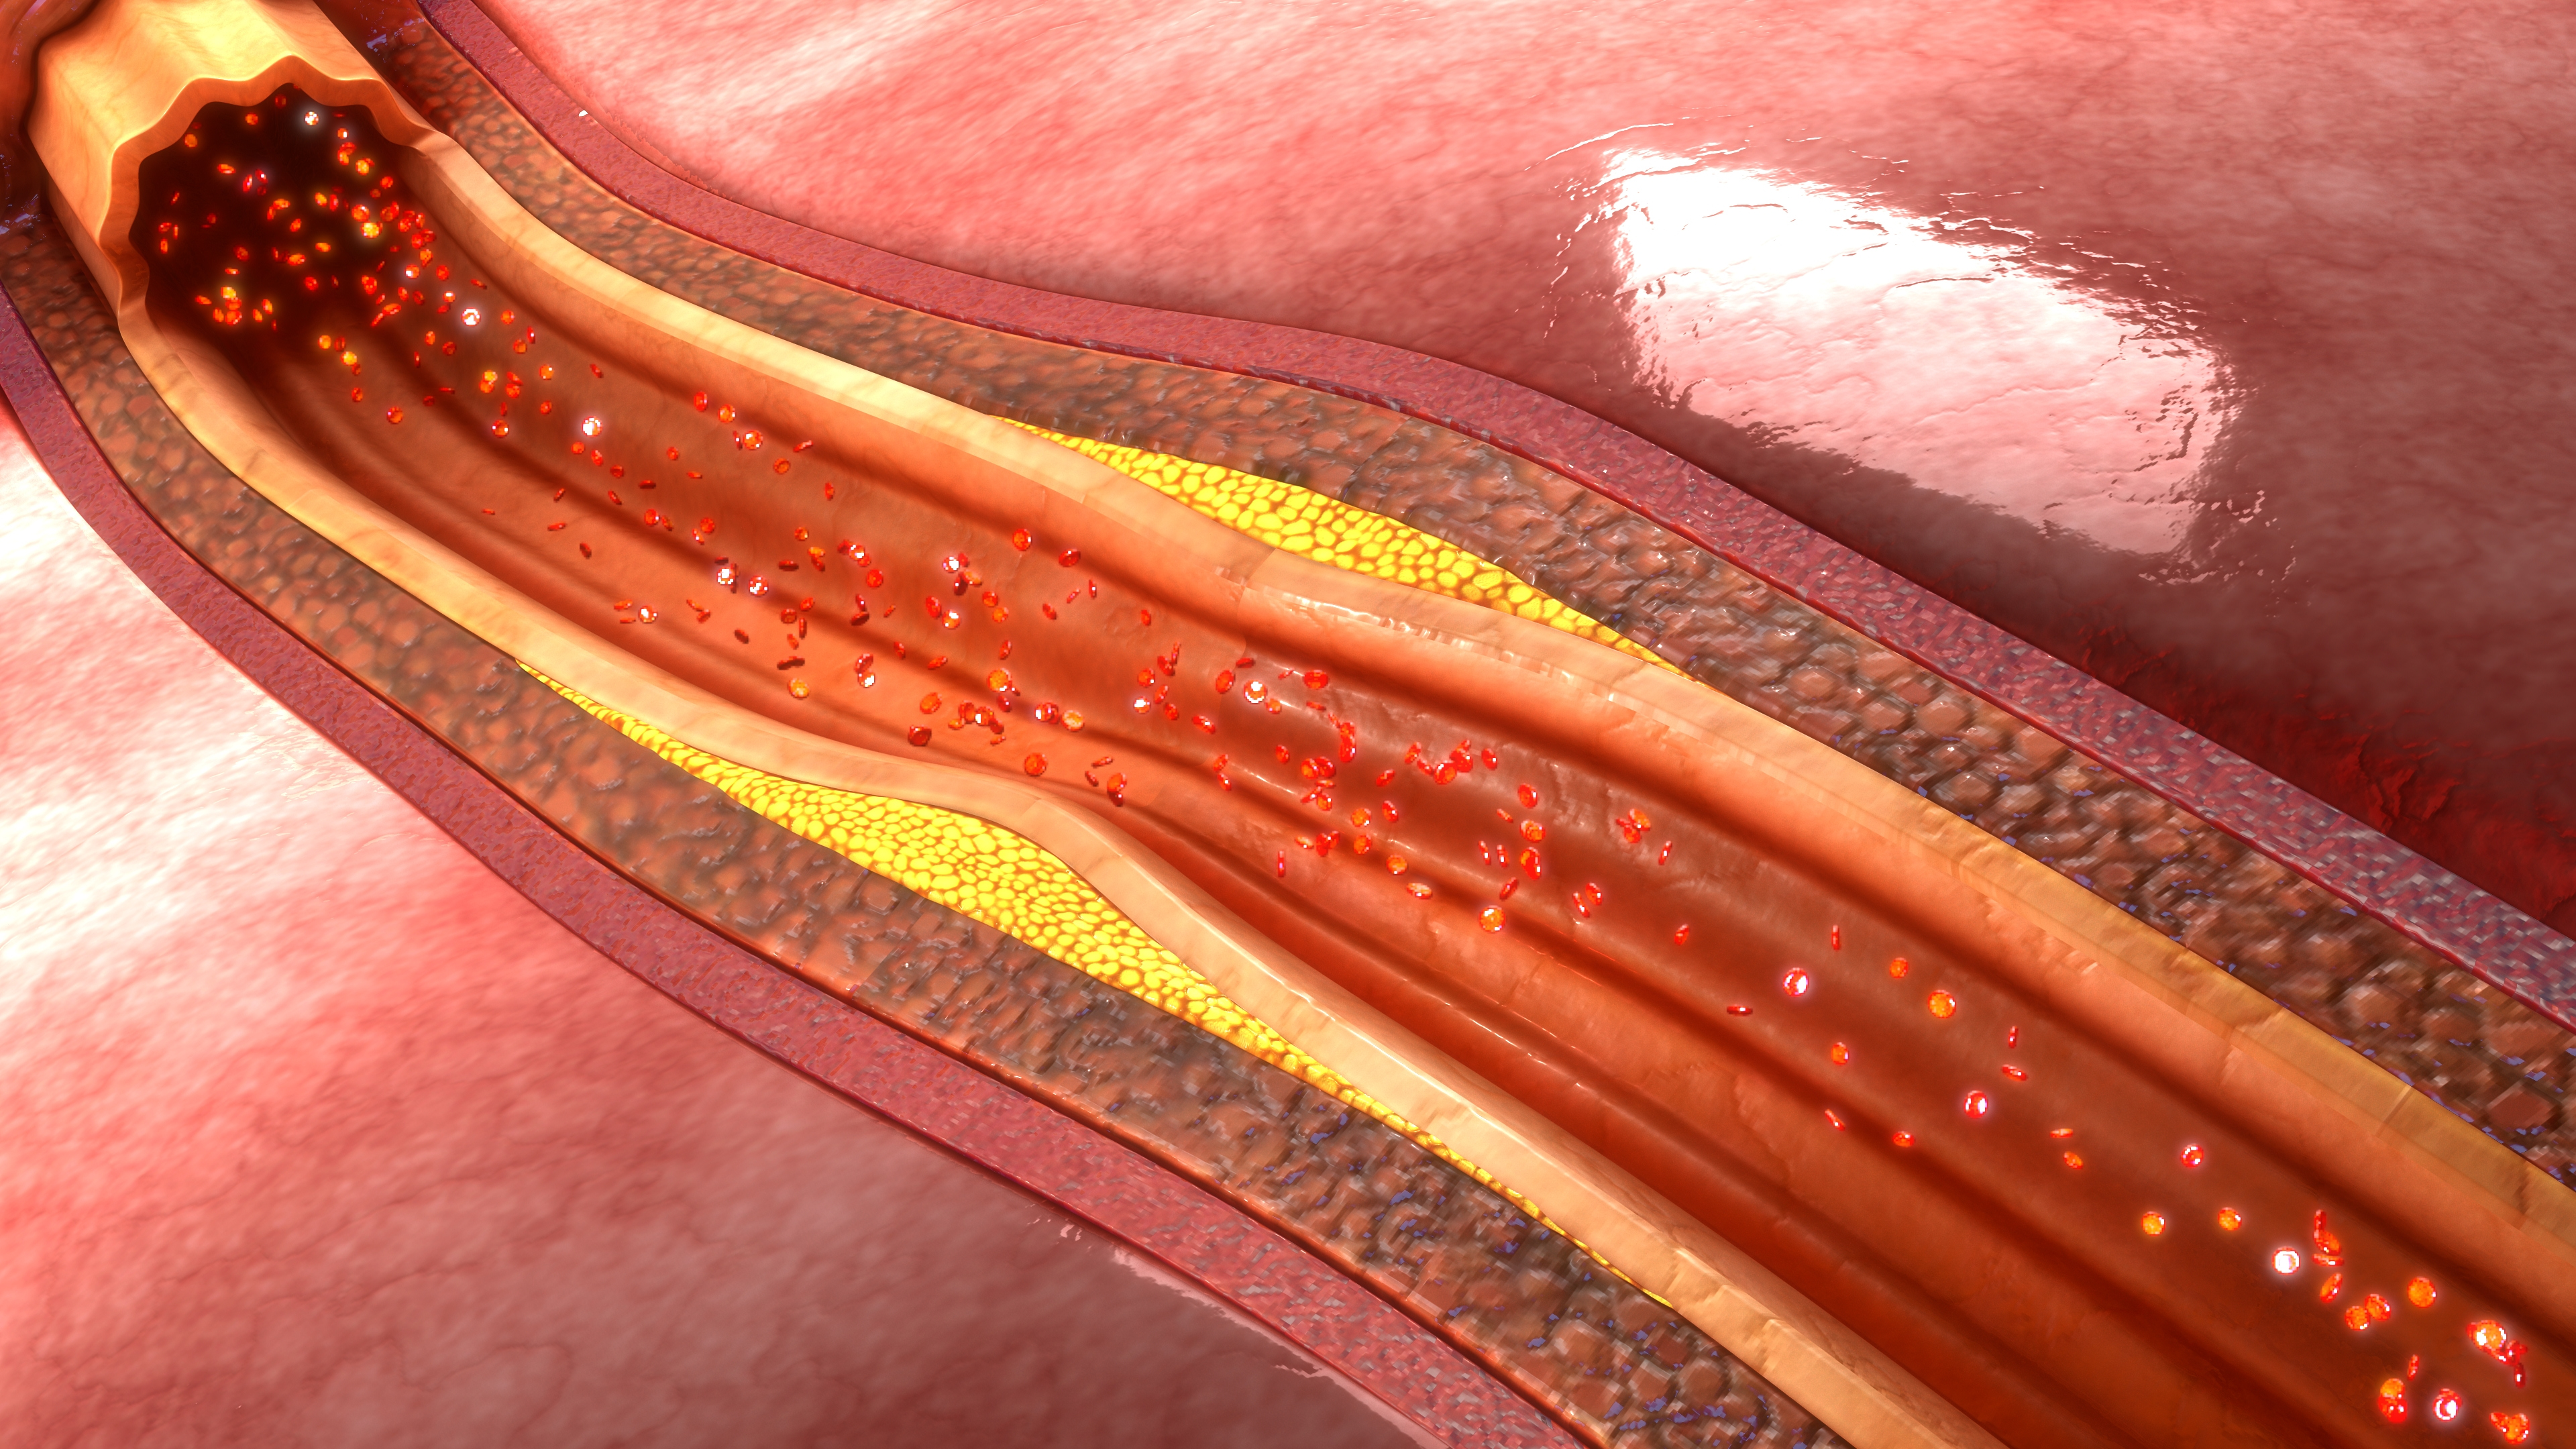 Cholesterol stuck to arteries is not good for you, doctors say (clevelandclinic.org)